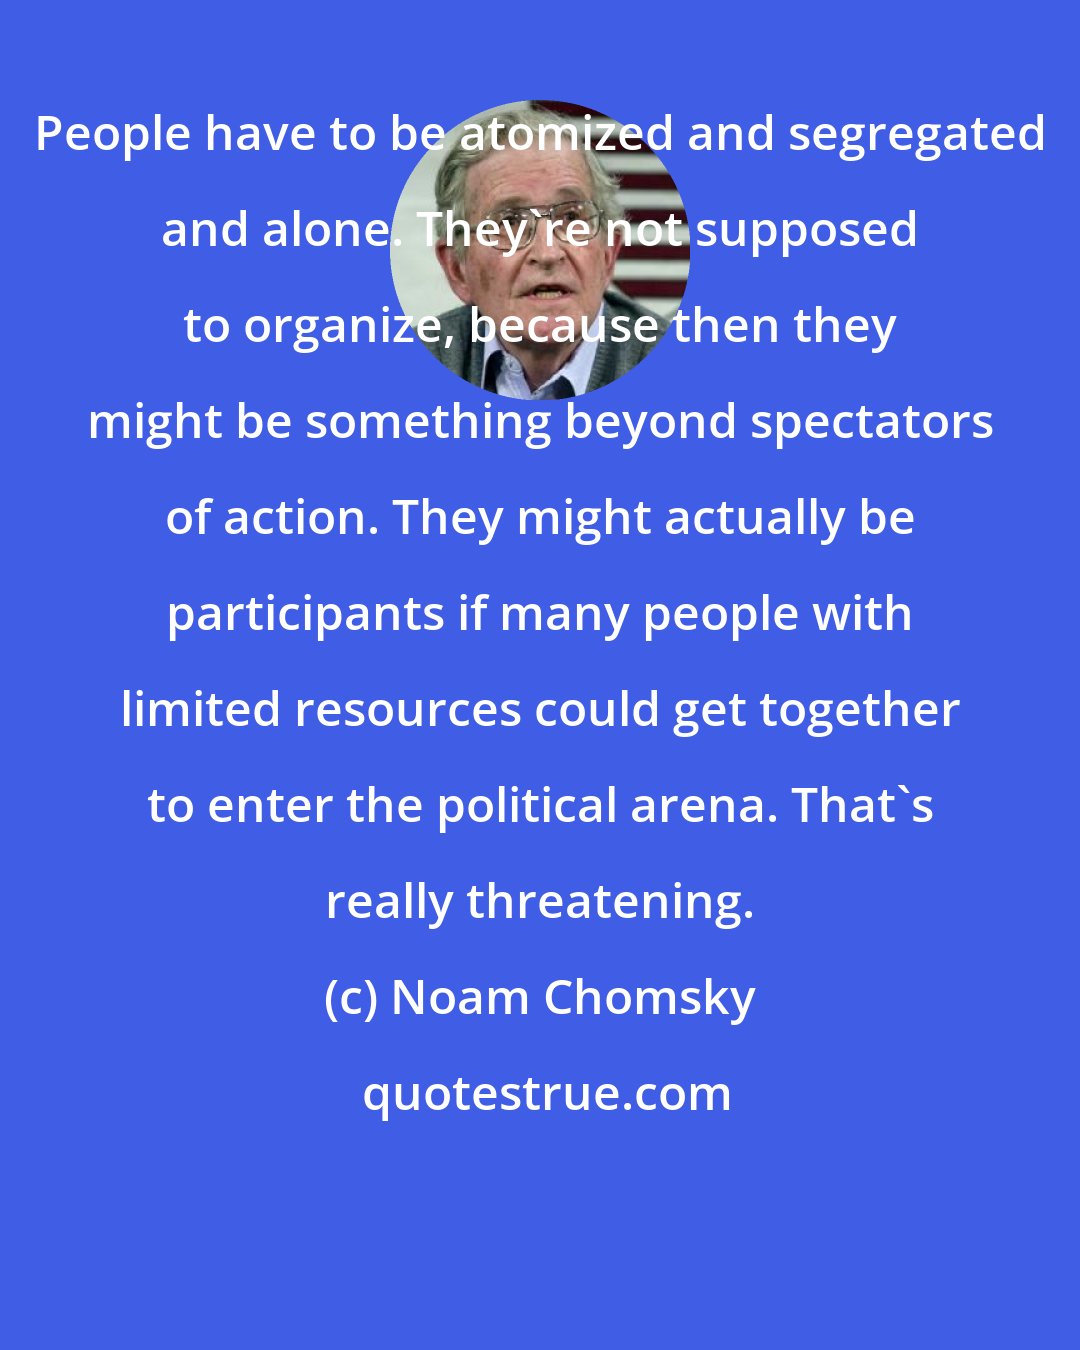 Noam Chomsky: People have to be atomized and segregated and alone. They're not supposed to organize, because then they might be something beyond spectators of action. They might actually be participants if many people with limited resources could get together to enter the political arena. That's really threatening.